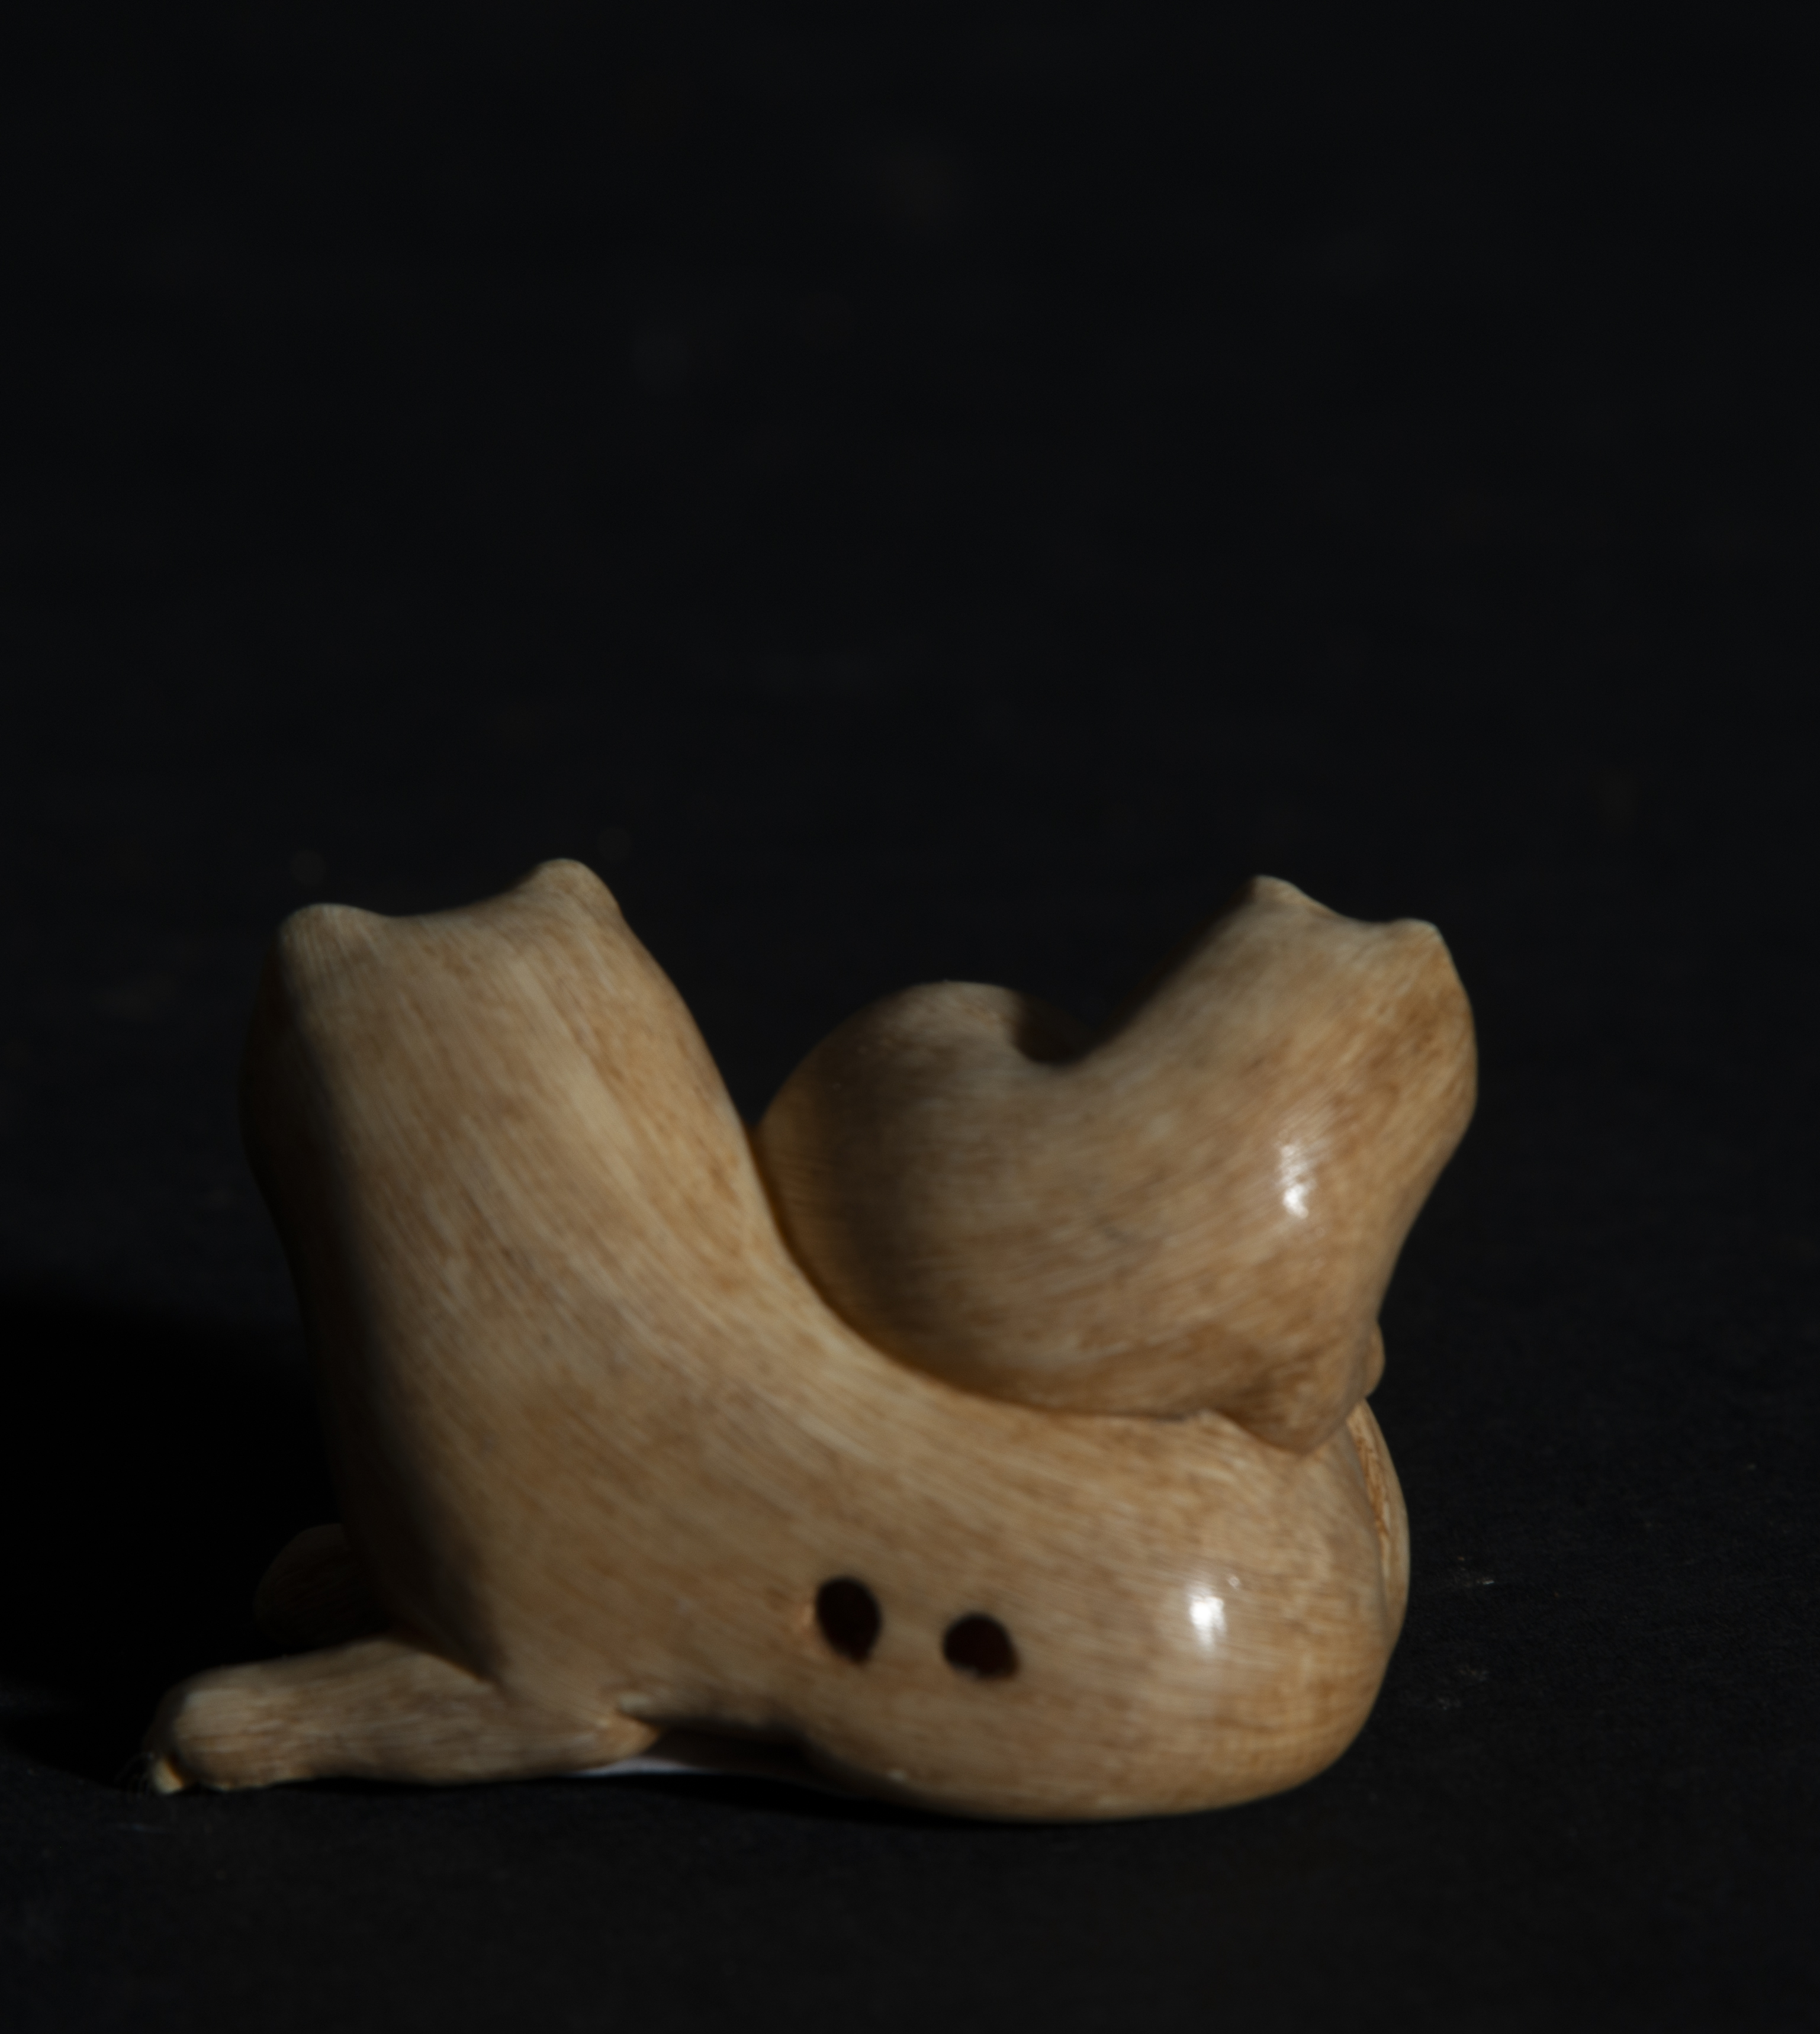 Japanese Netsuke on Mammoth Fang (Mammuthus primigenius) representing Pair of Cats, 19th century Jap - Image 2 of 2